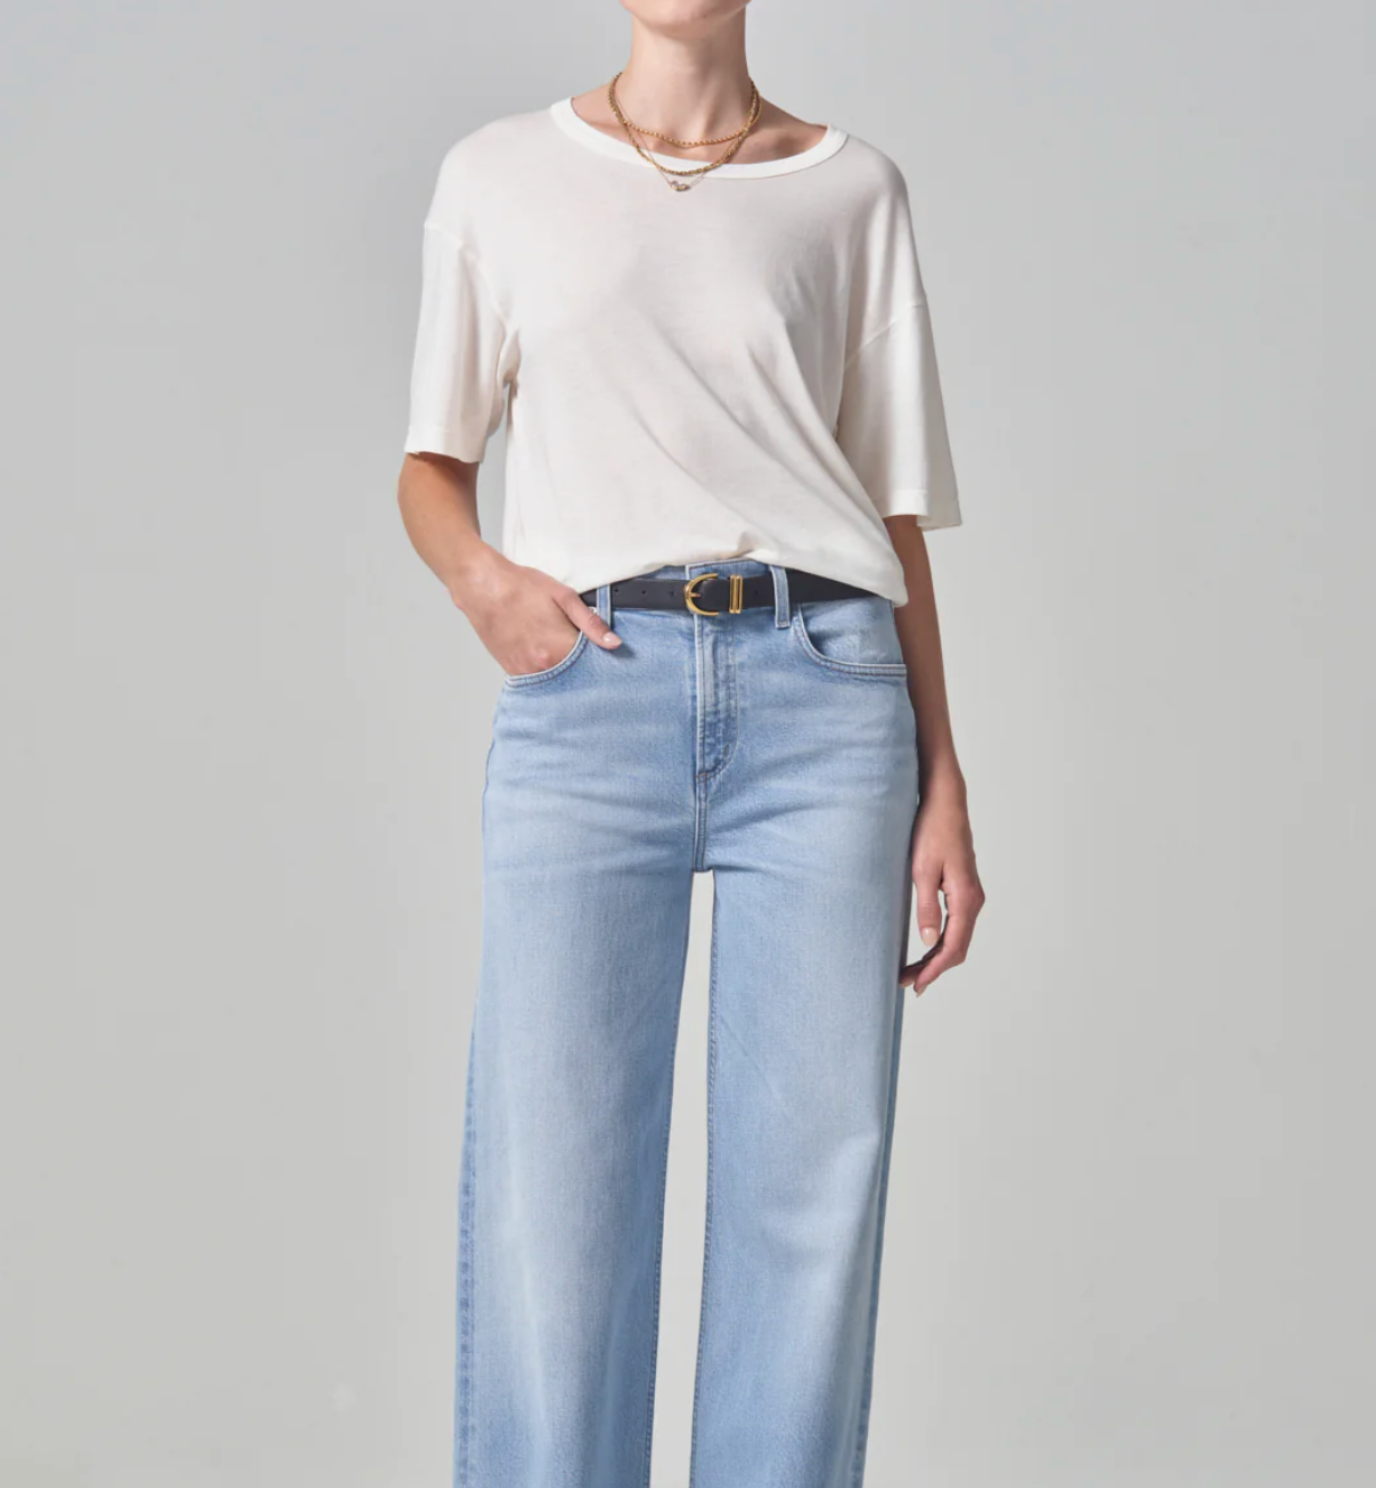 A woman in a simple white Elisabetta Relaxed Tee In Pashmina and blue jeans stands with one hand in her pocket against a plain background, focusing on Citizens Of Humanity/AGOLDE Arizona-style casual wear.